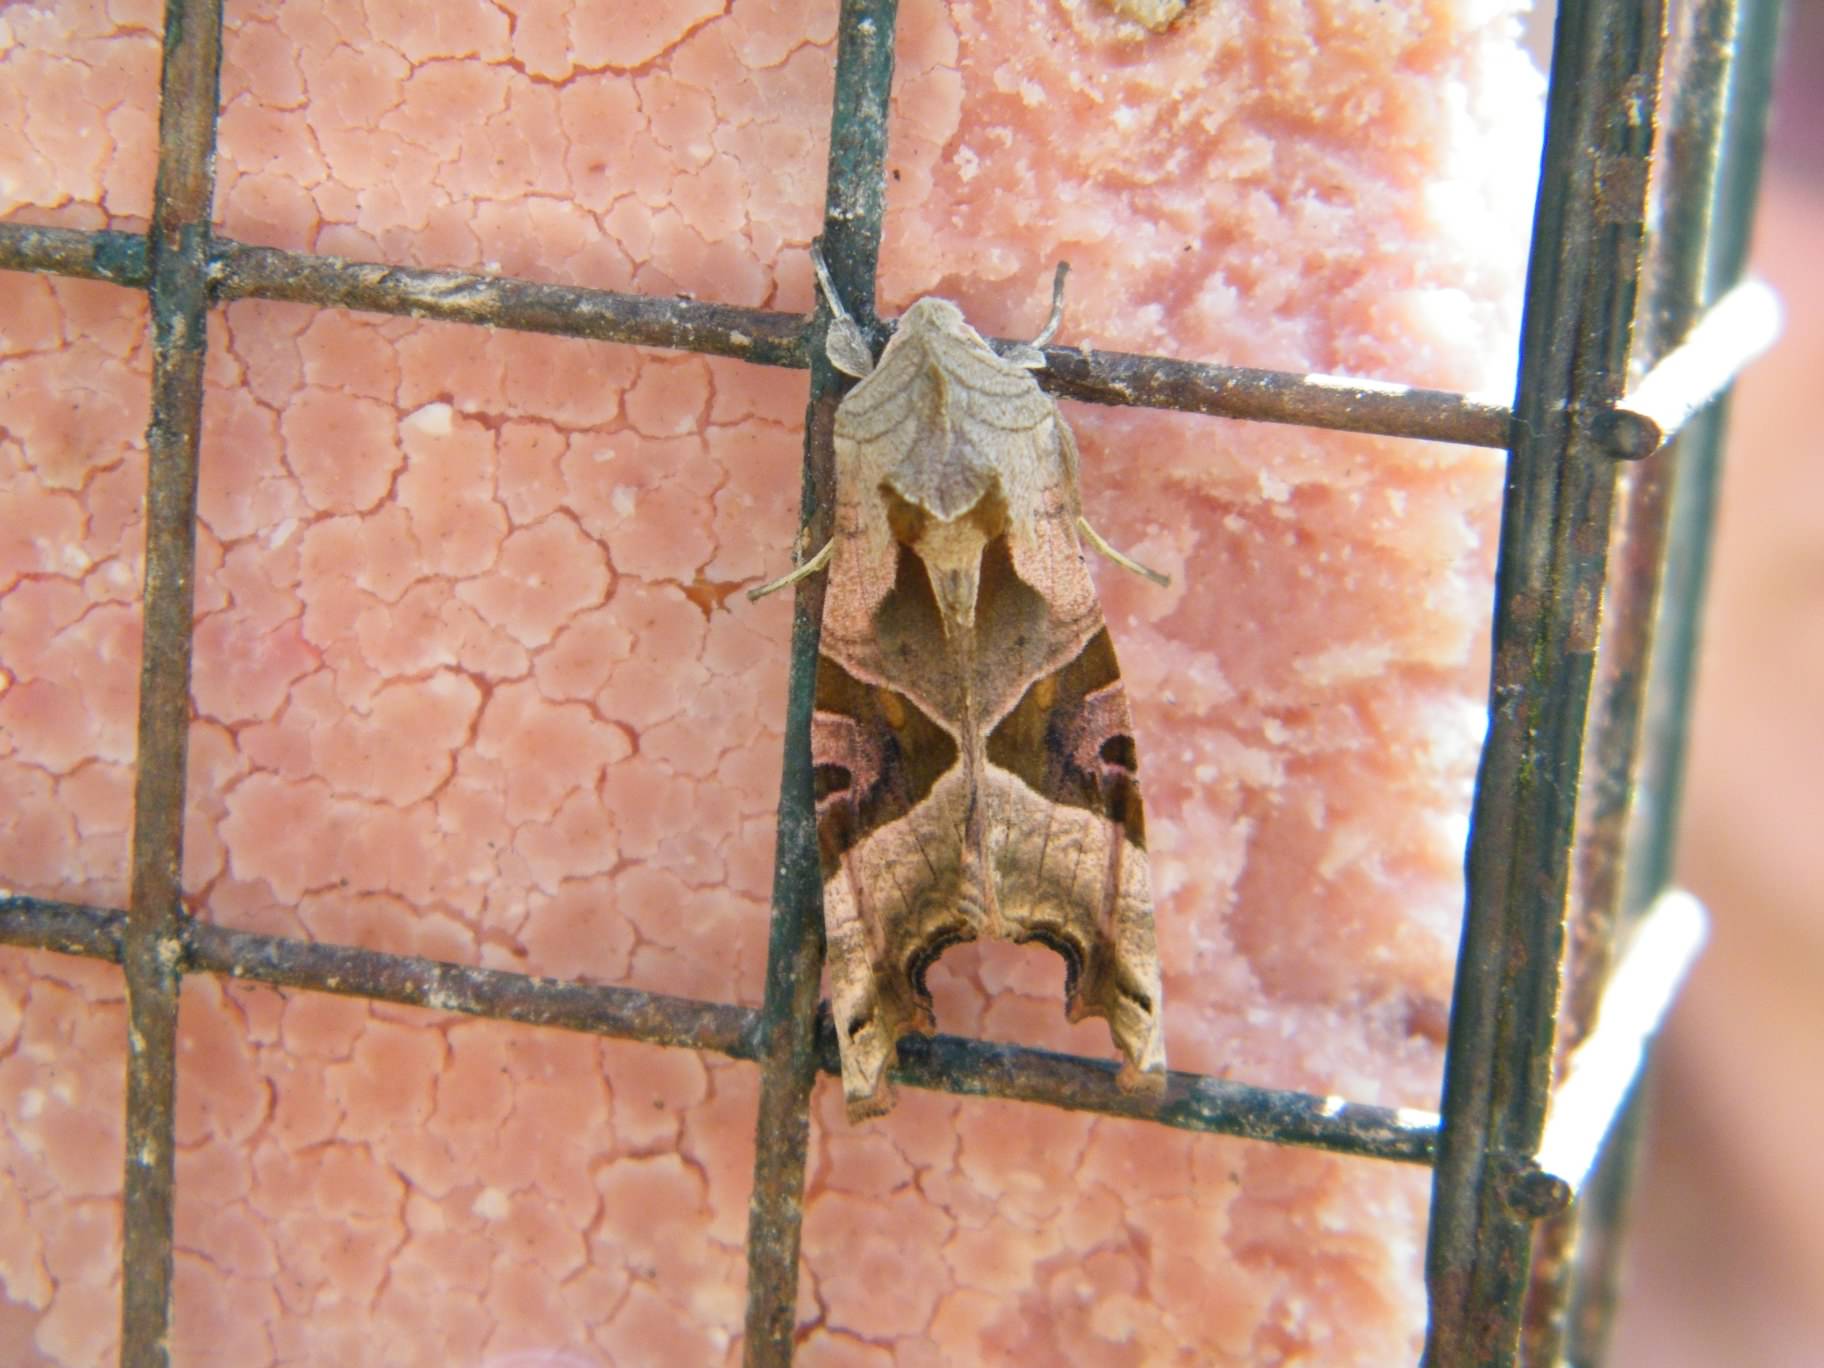 Angle Shades moth - Phlogophora meticulosa, species information page